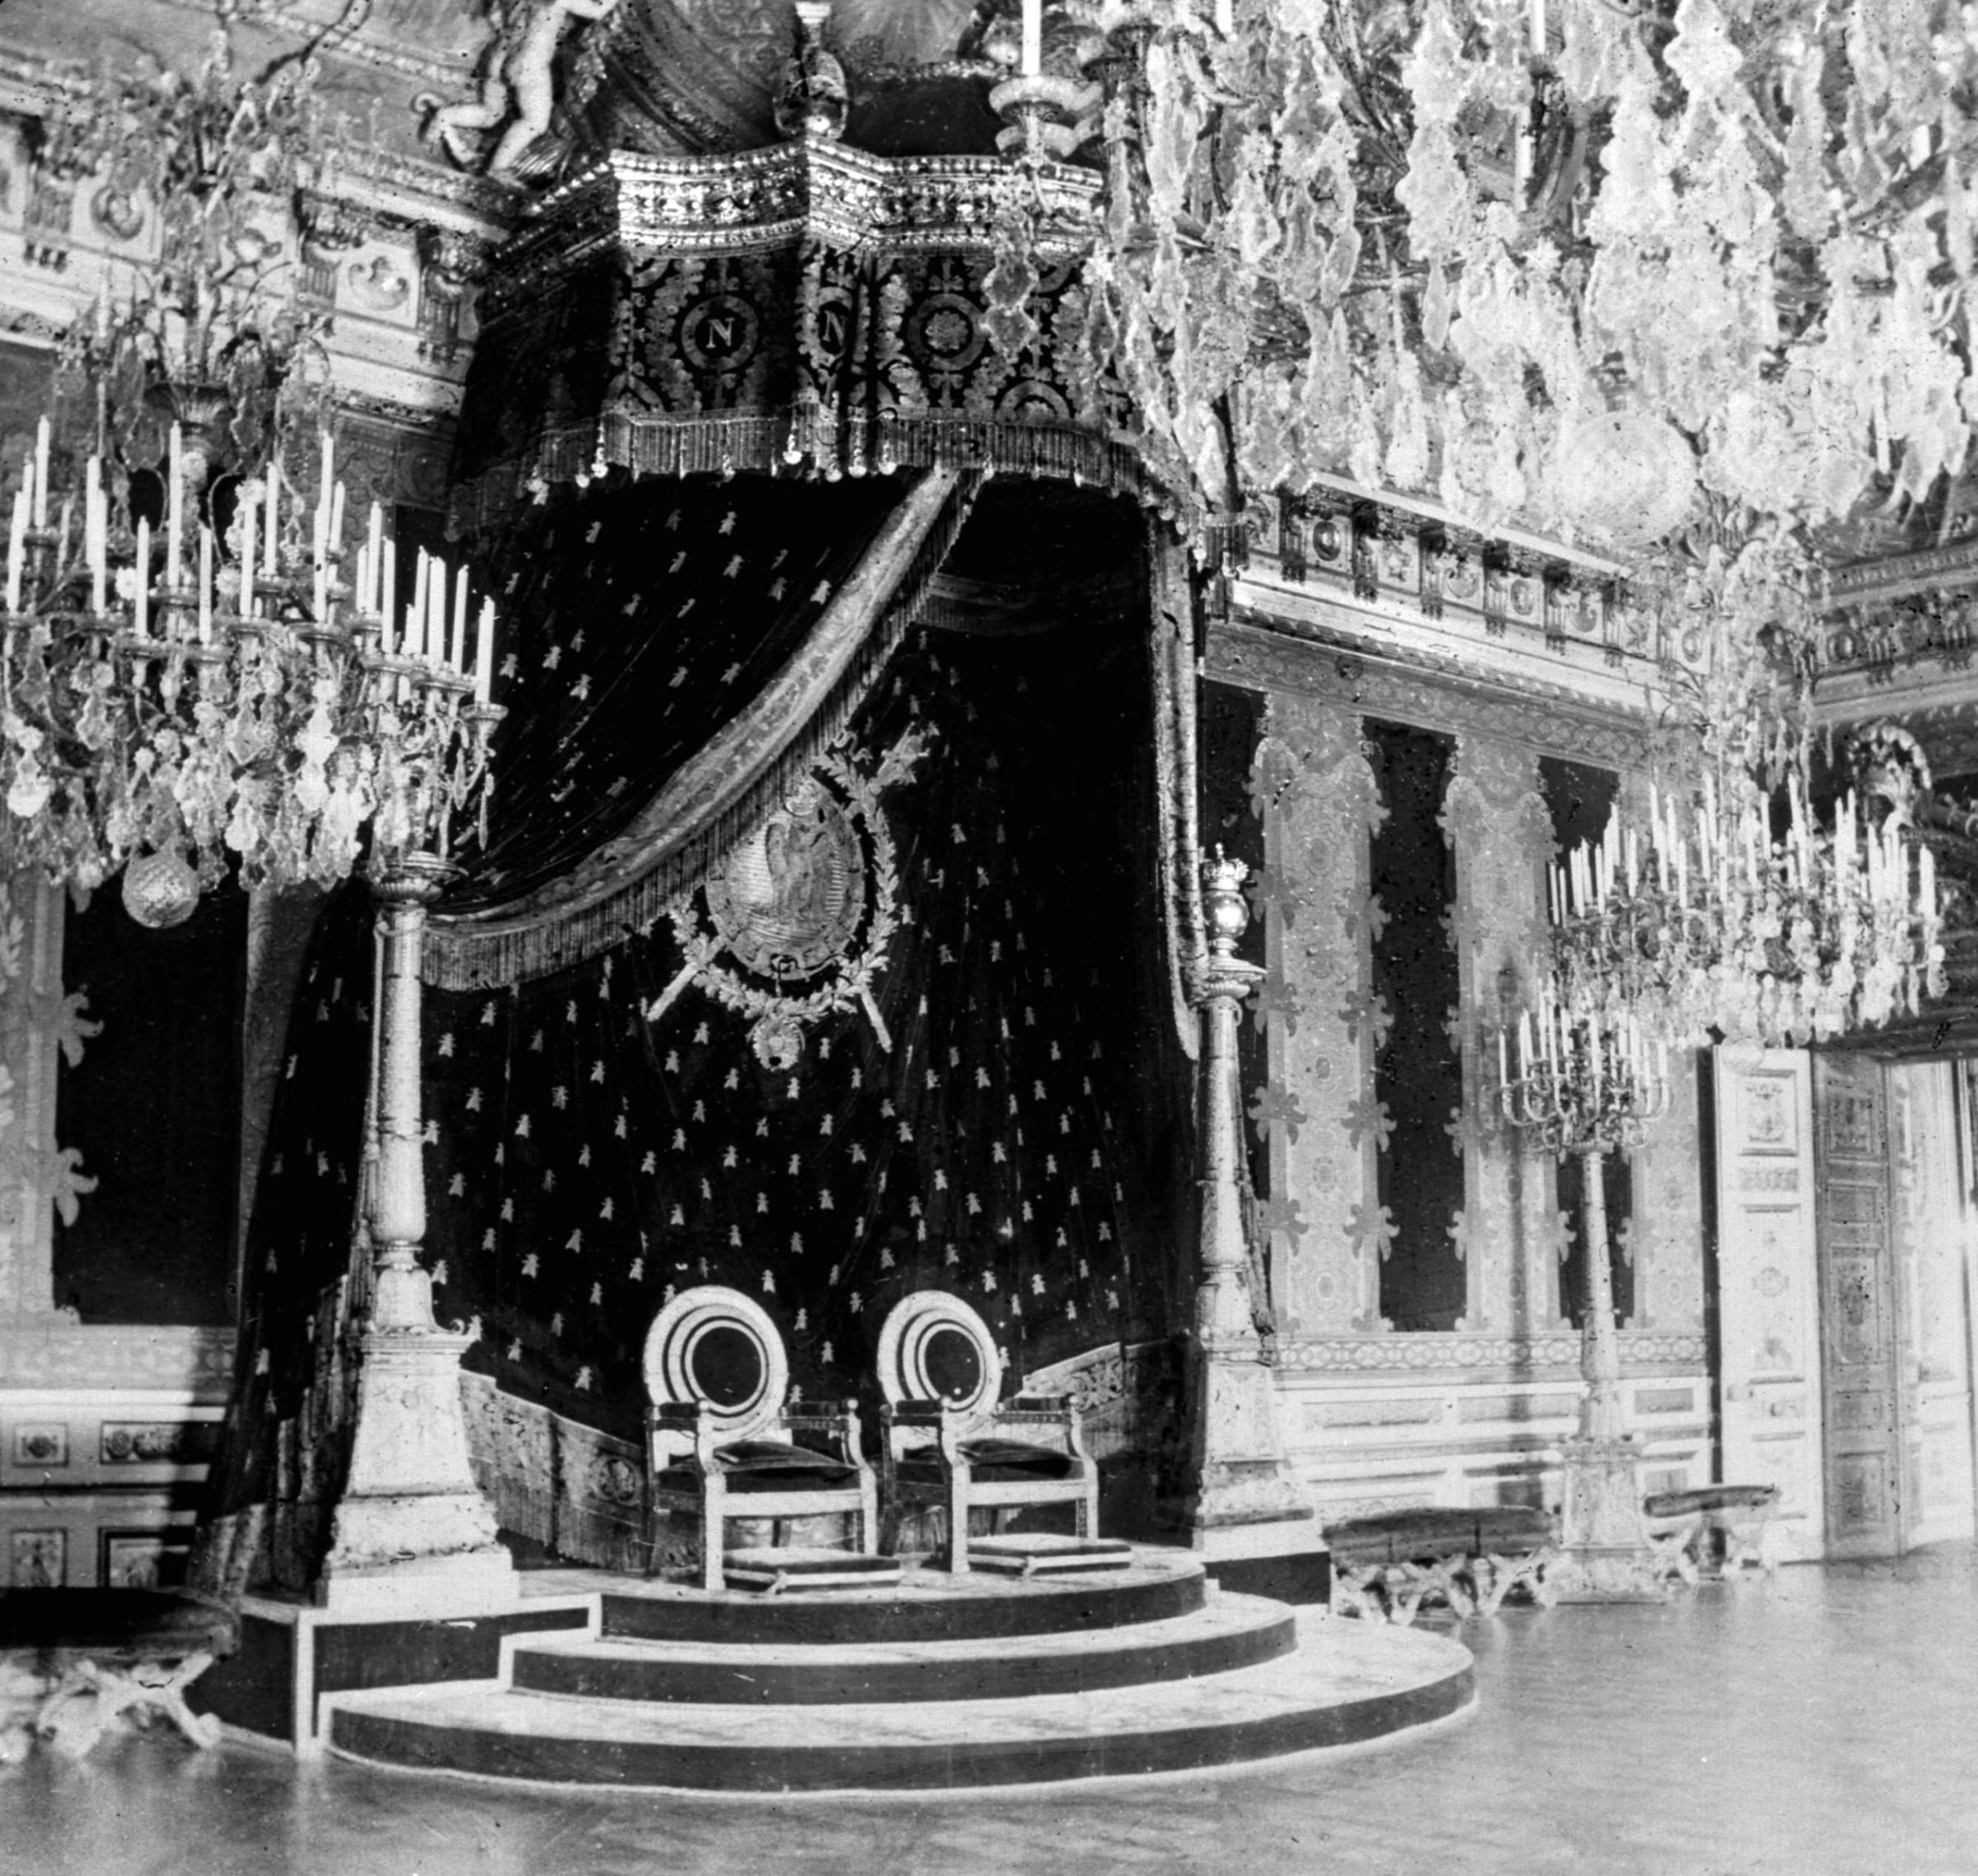 The throne room of the Tuileries Palace. Paris, before 1870.